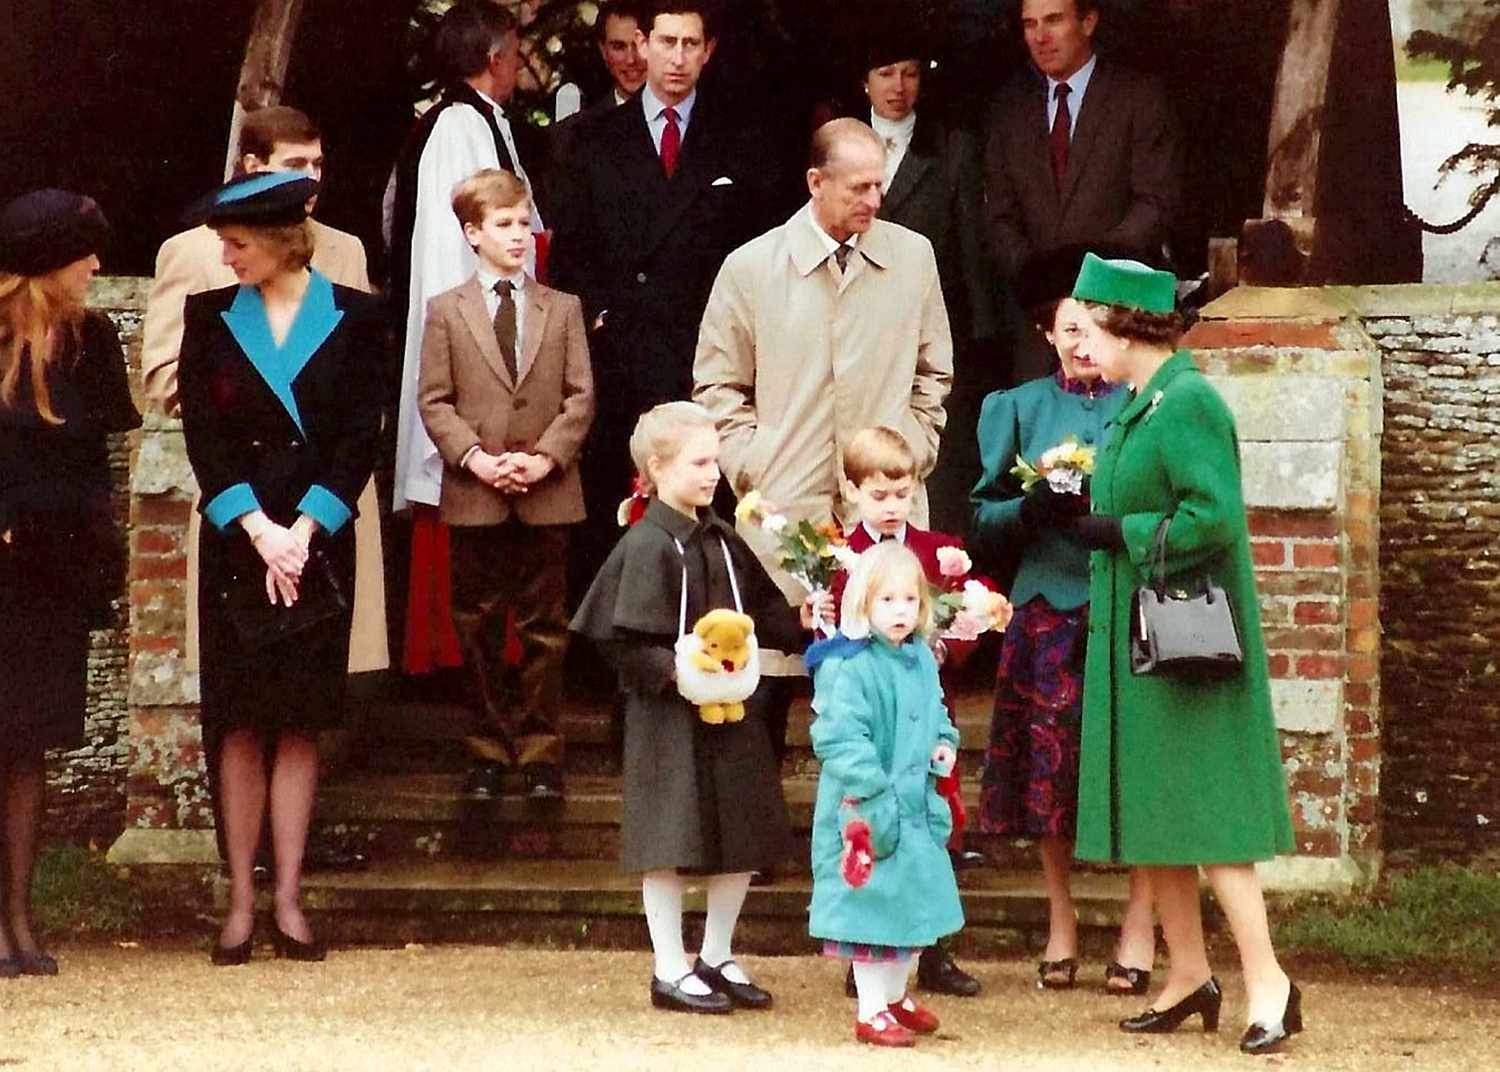 Never-Before-Seen Photos of the Royal Family in the '80s Resurface as the Queen Returns to Sandringham